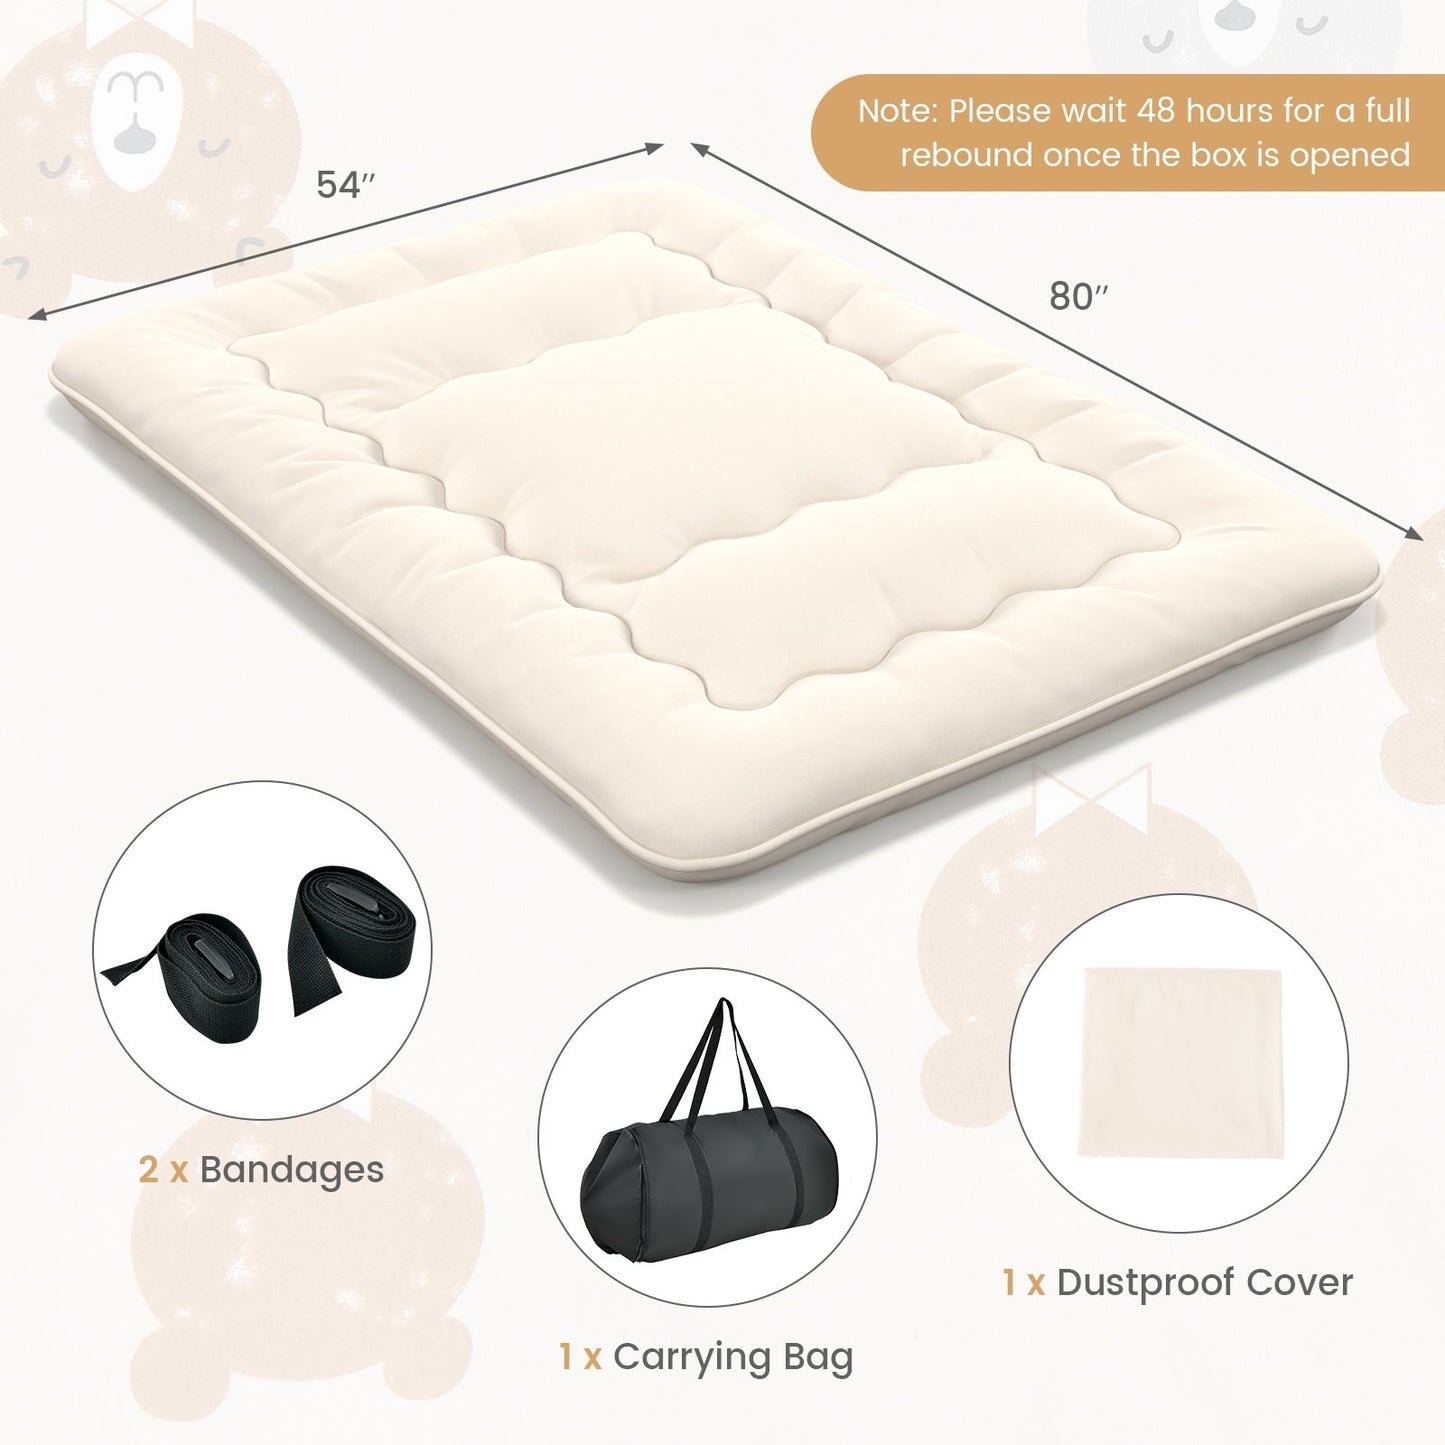 Queen/King/Twin/Full Futon Mattress Floor Sleeping Pad with Washable Cover Beige-Full Size, Beige